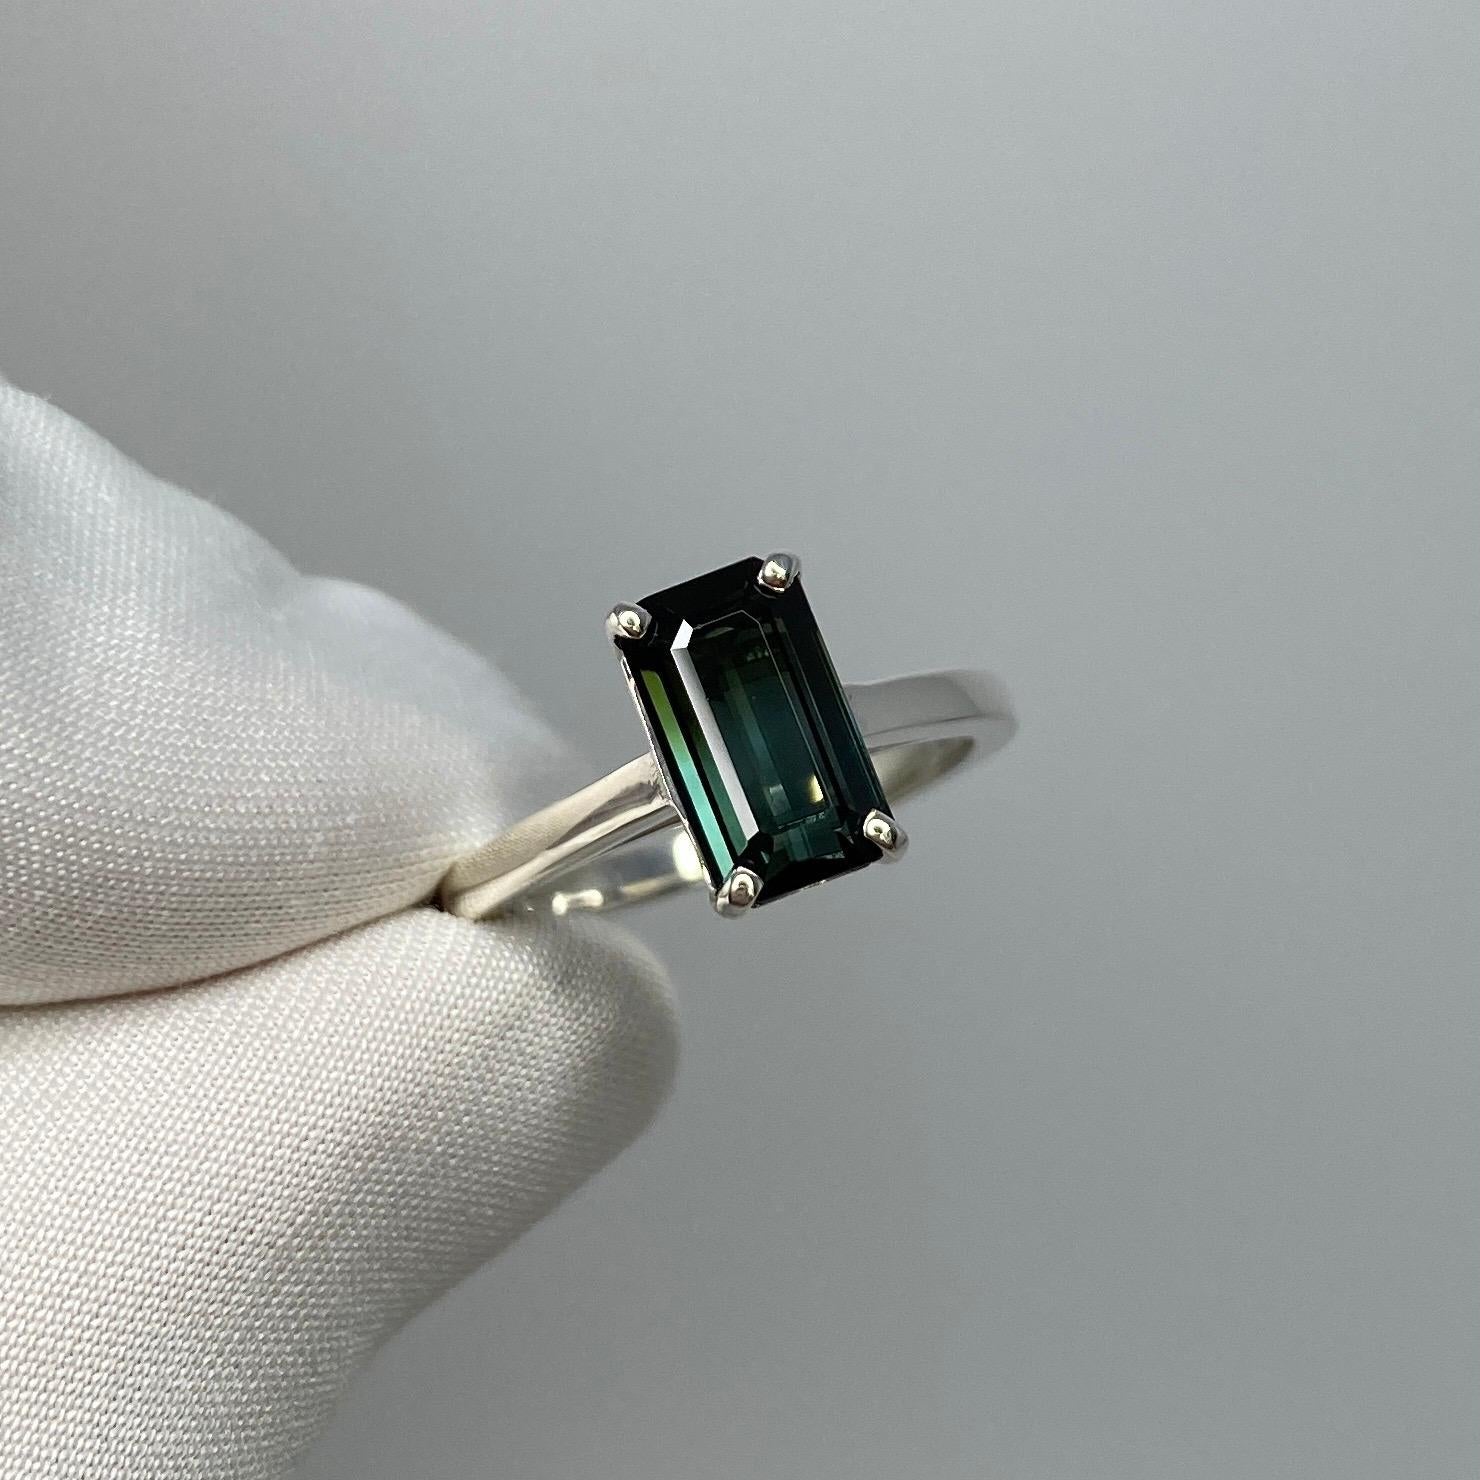 Bi Colour Green Blue Emerald Cut Tourmaline Silver Solitaire Ring.

Stunning 2.12ct stone with a beautiful bi colour effect and very good clarity, clean stone with only some small natural inclusions visible when looking closely. Set in a custom made